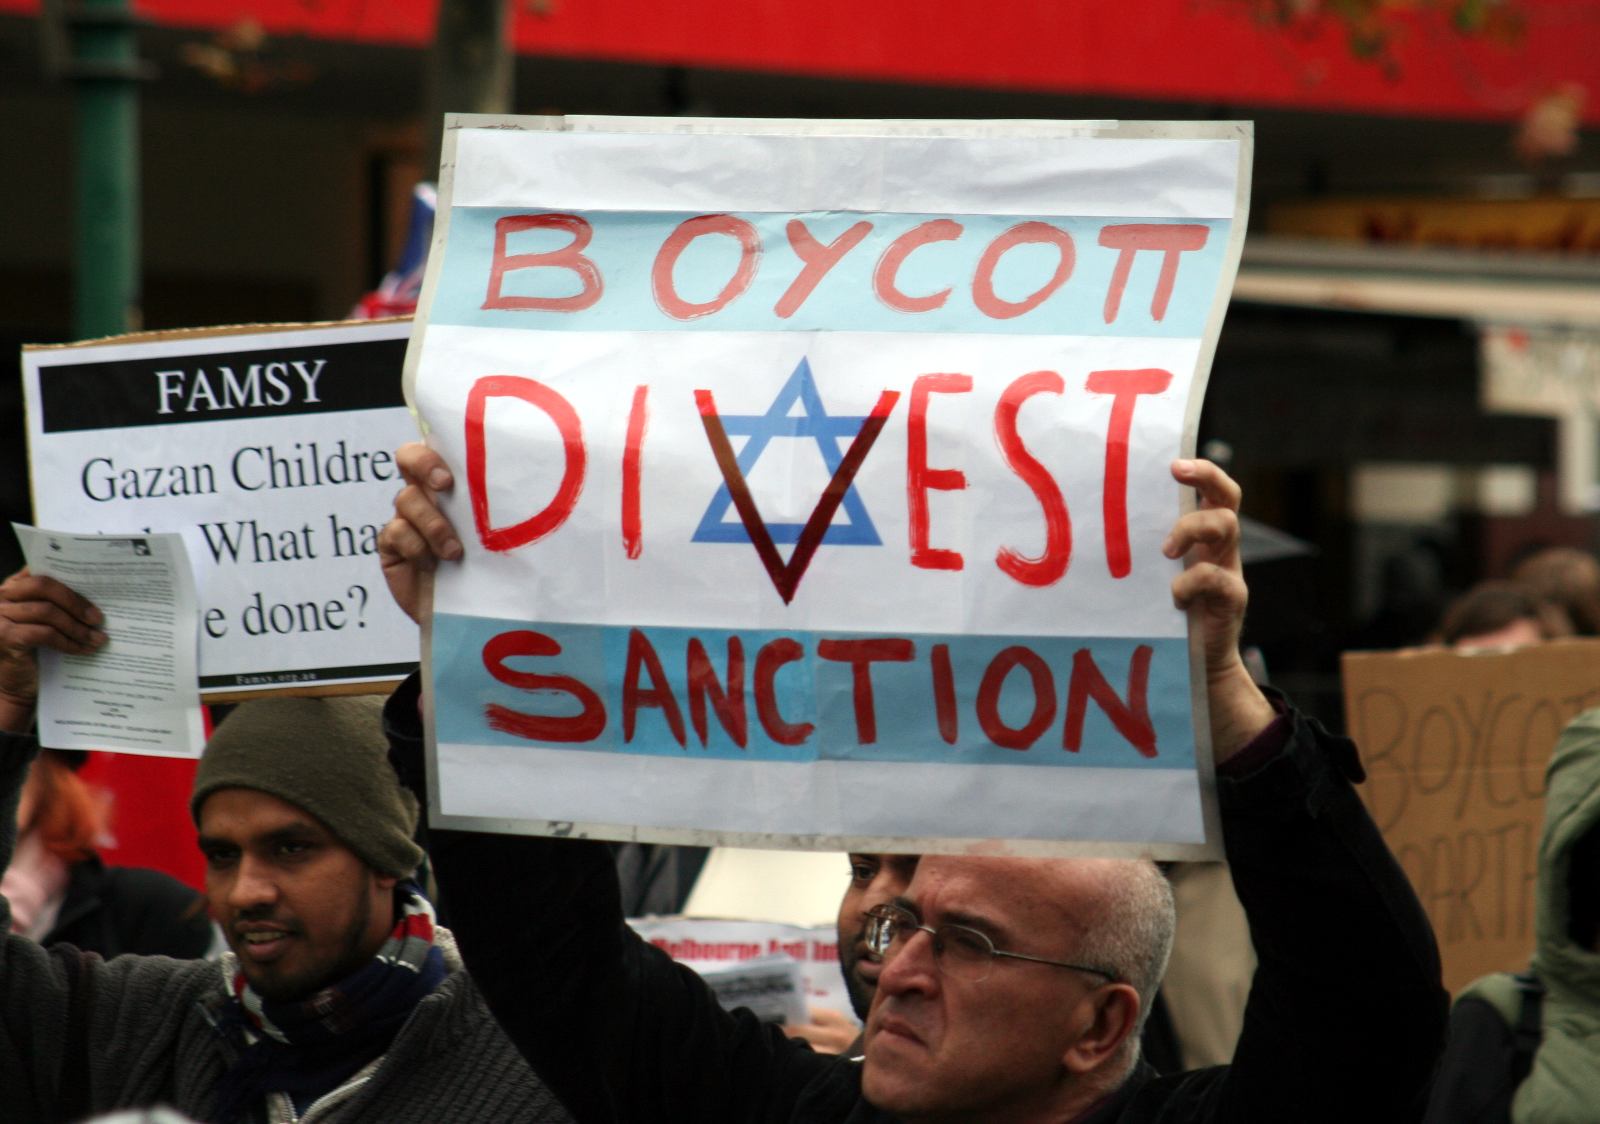 The global boycott movement has experienced a recent surge of support worldwide